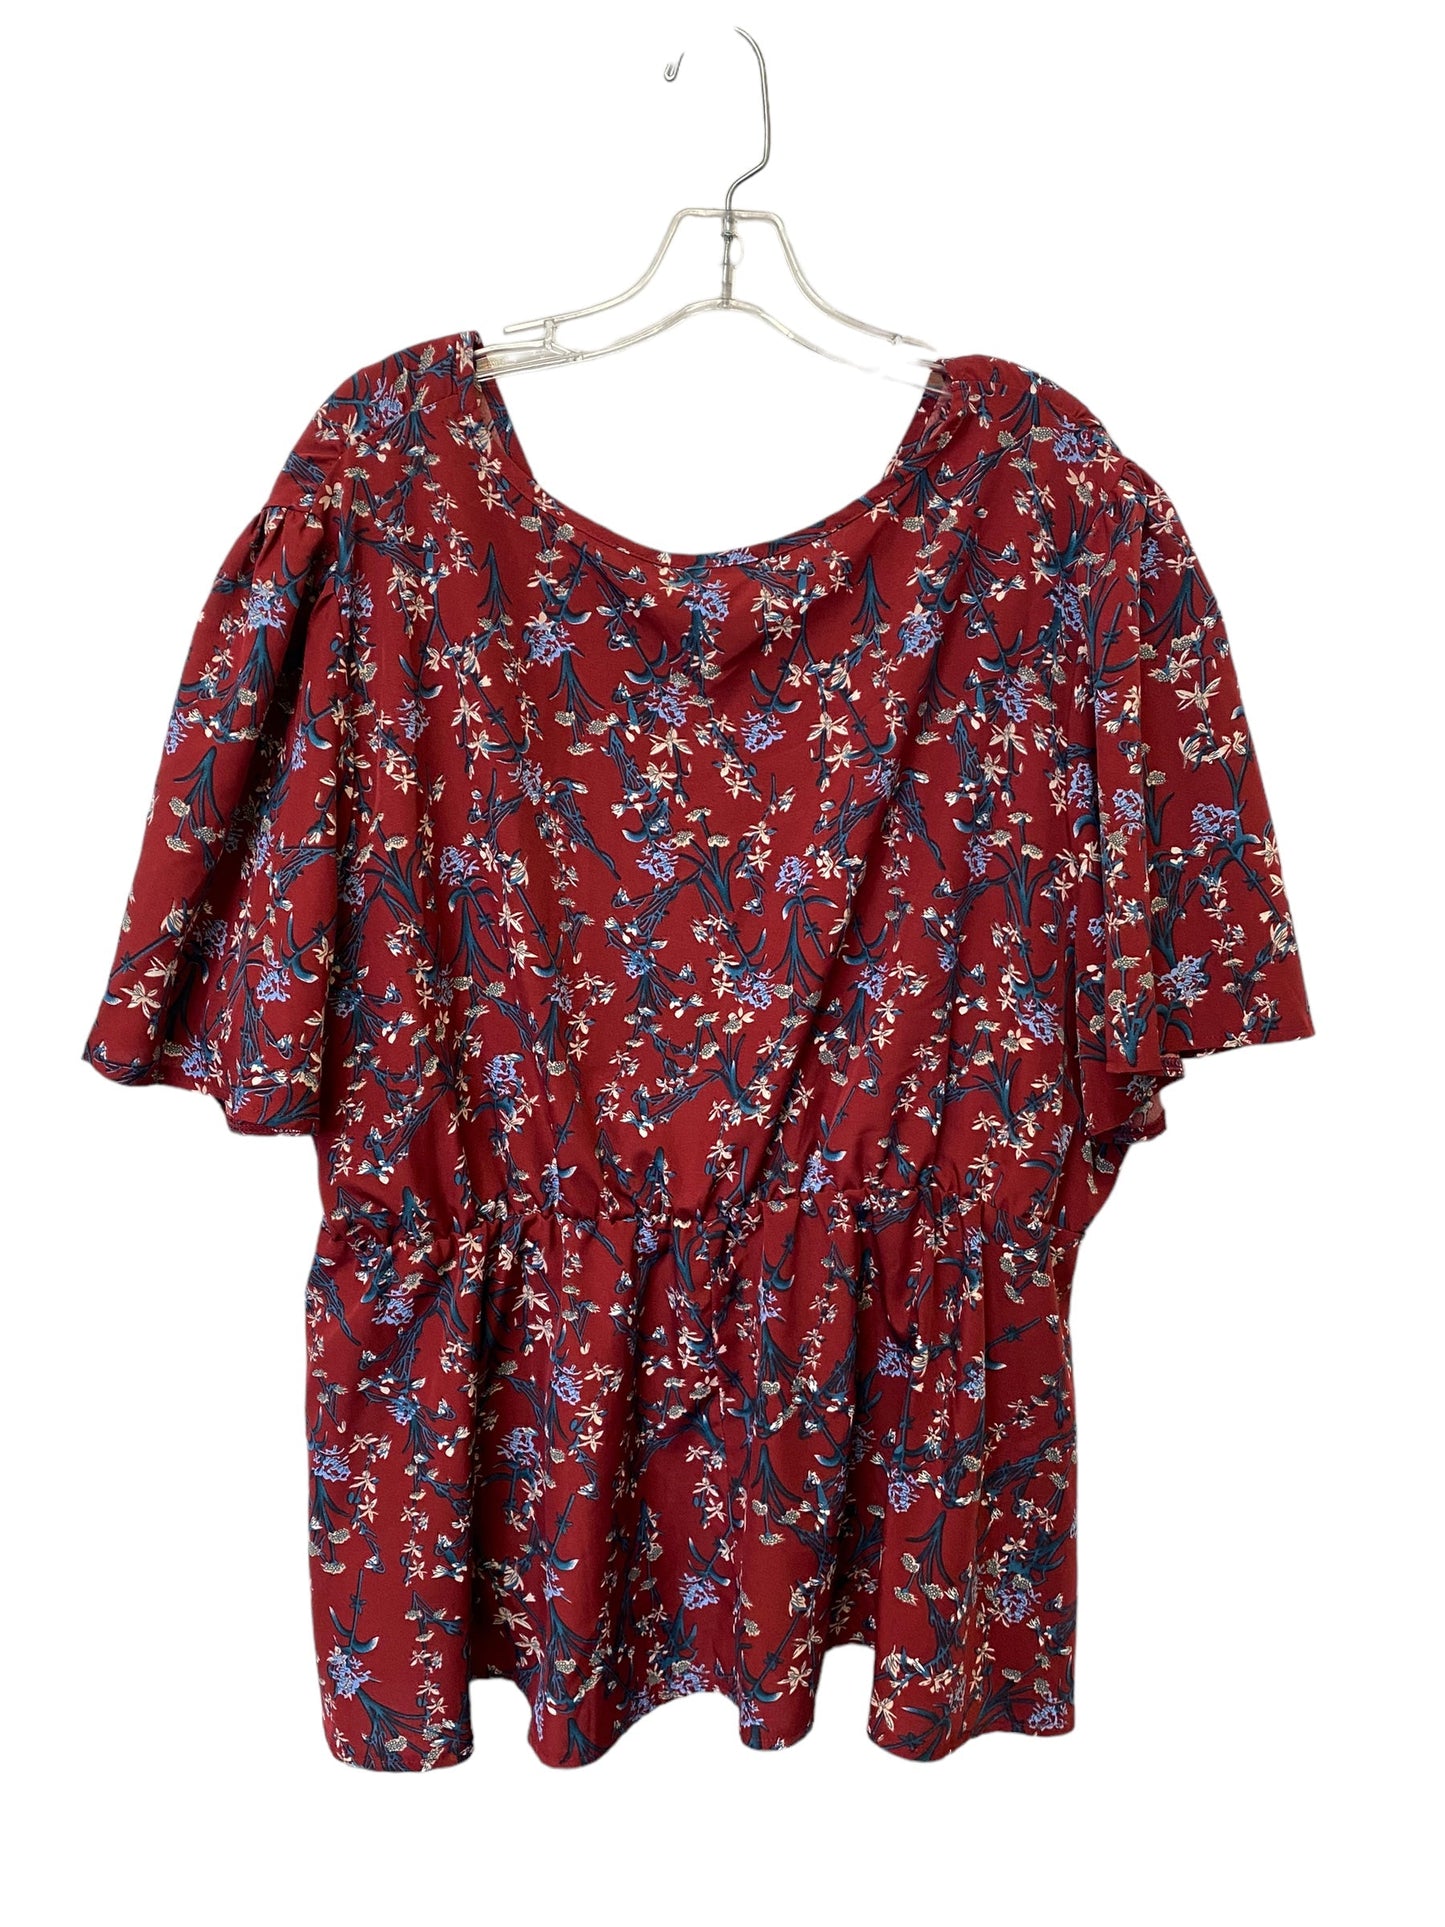 Top Short Sleeve By Shein  Size: 4x